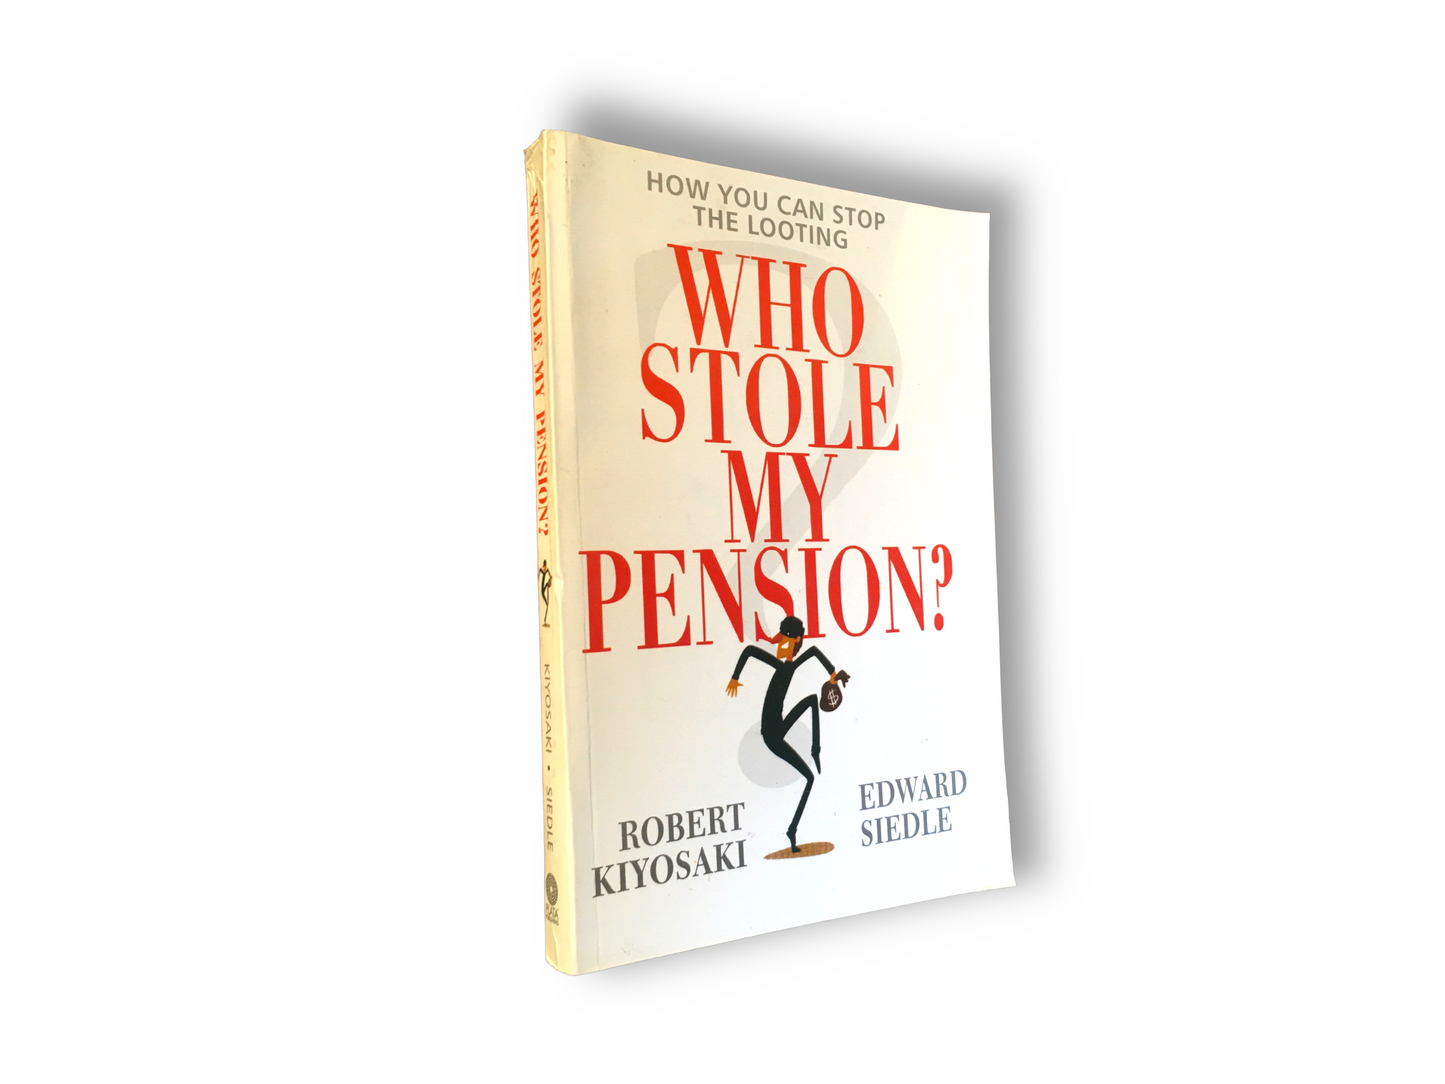 WHO STOLE MY PENSIONS